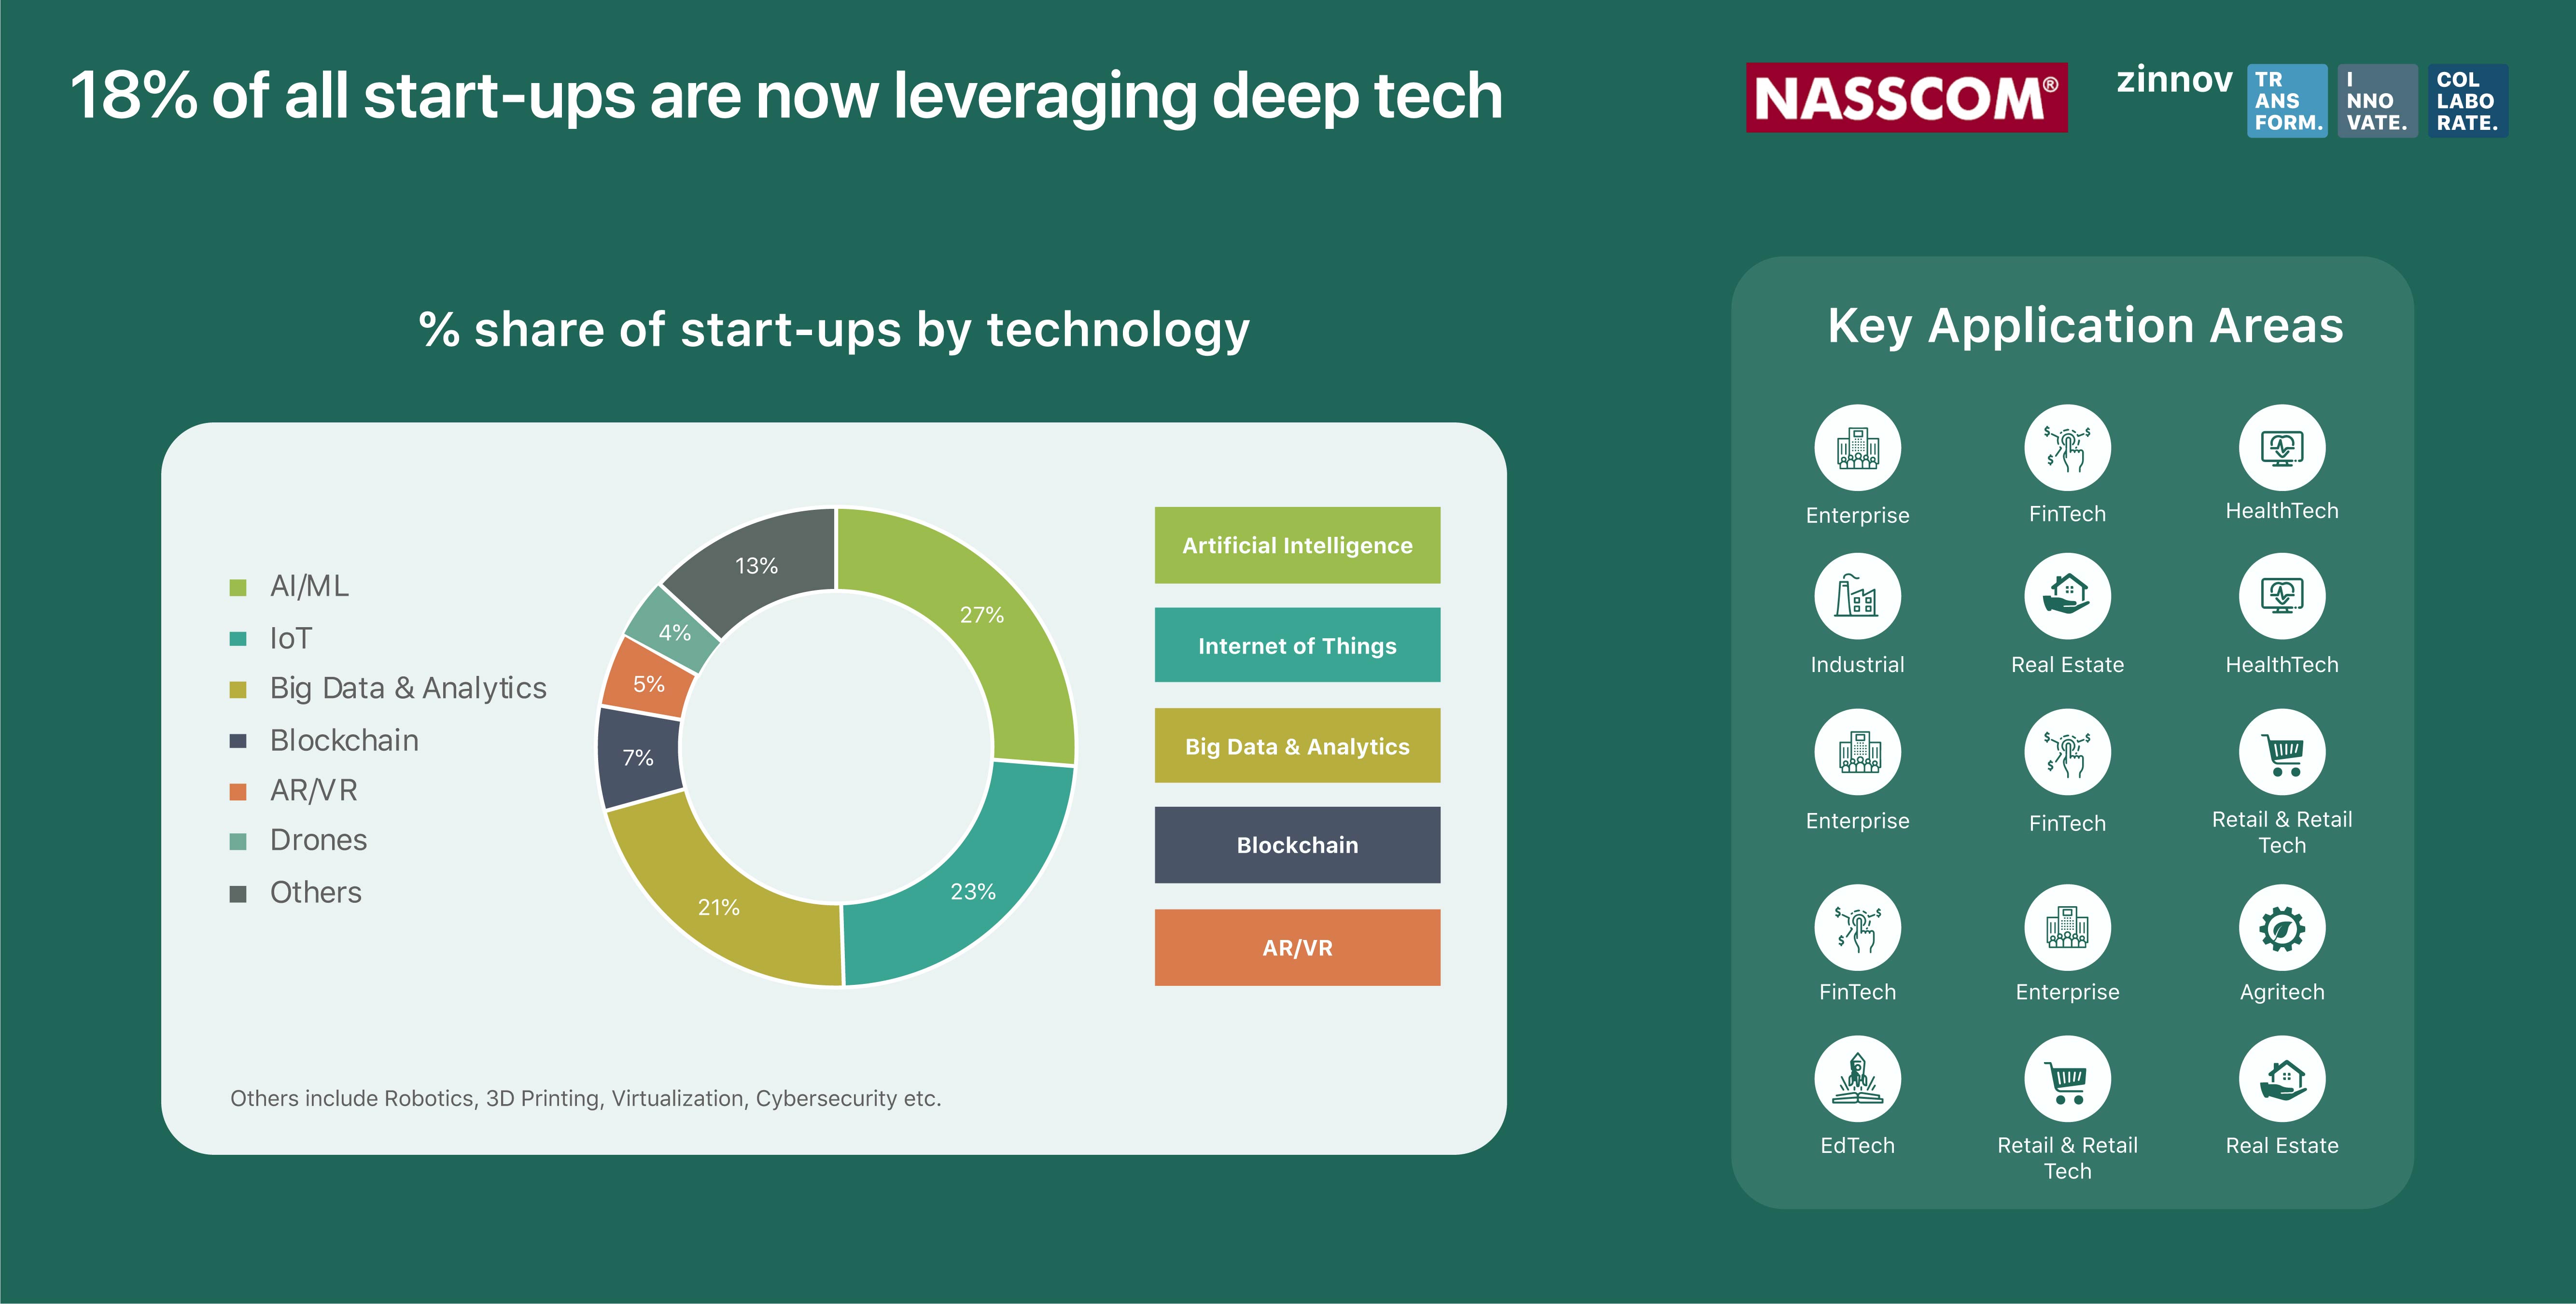 Start-ups are now leveraging deep tech